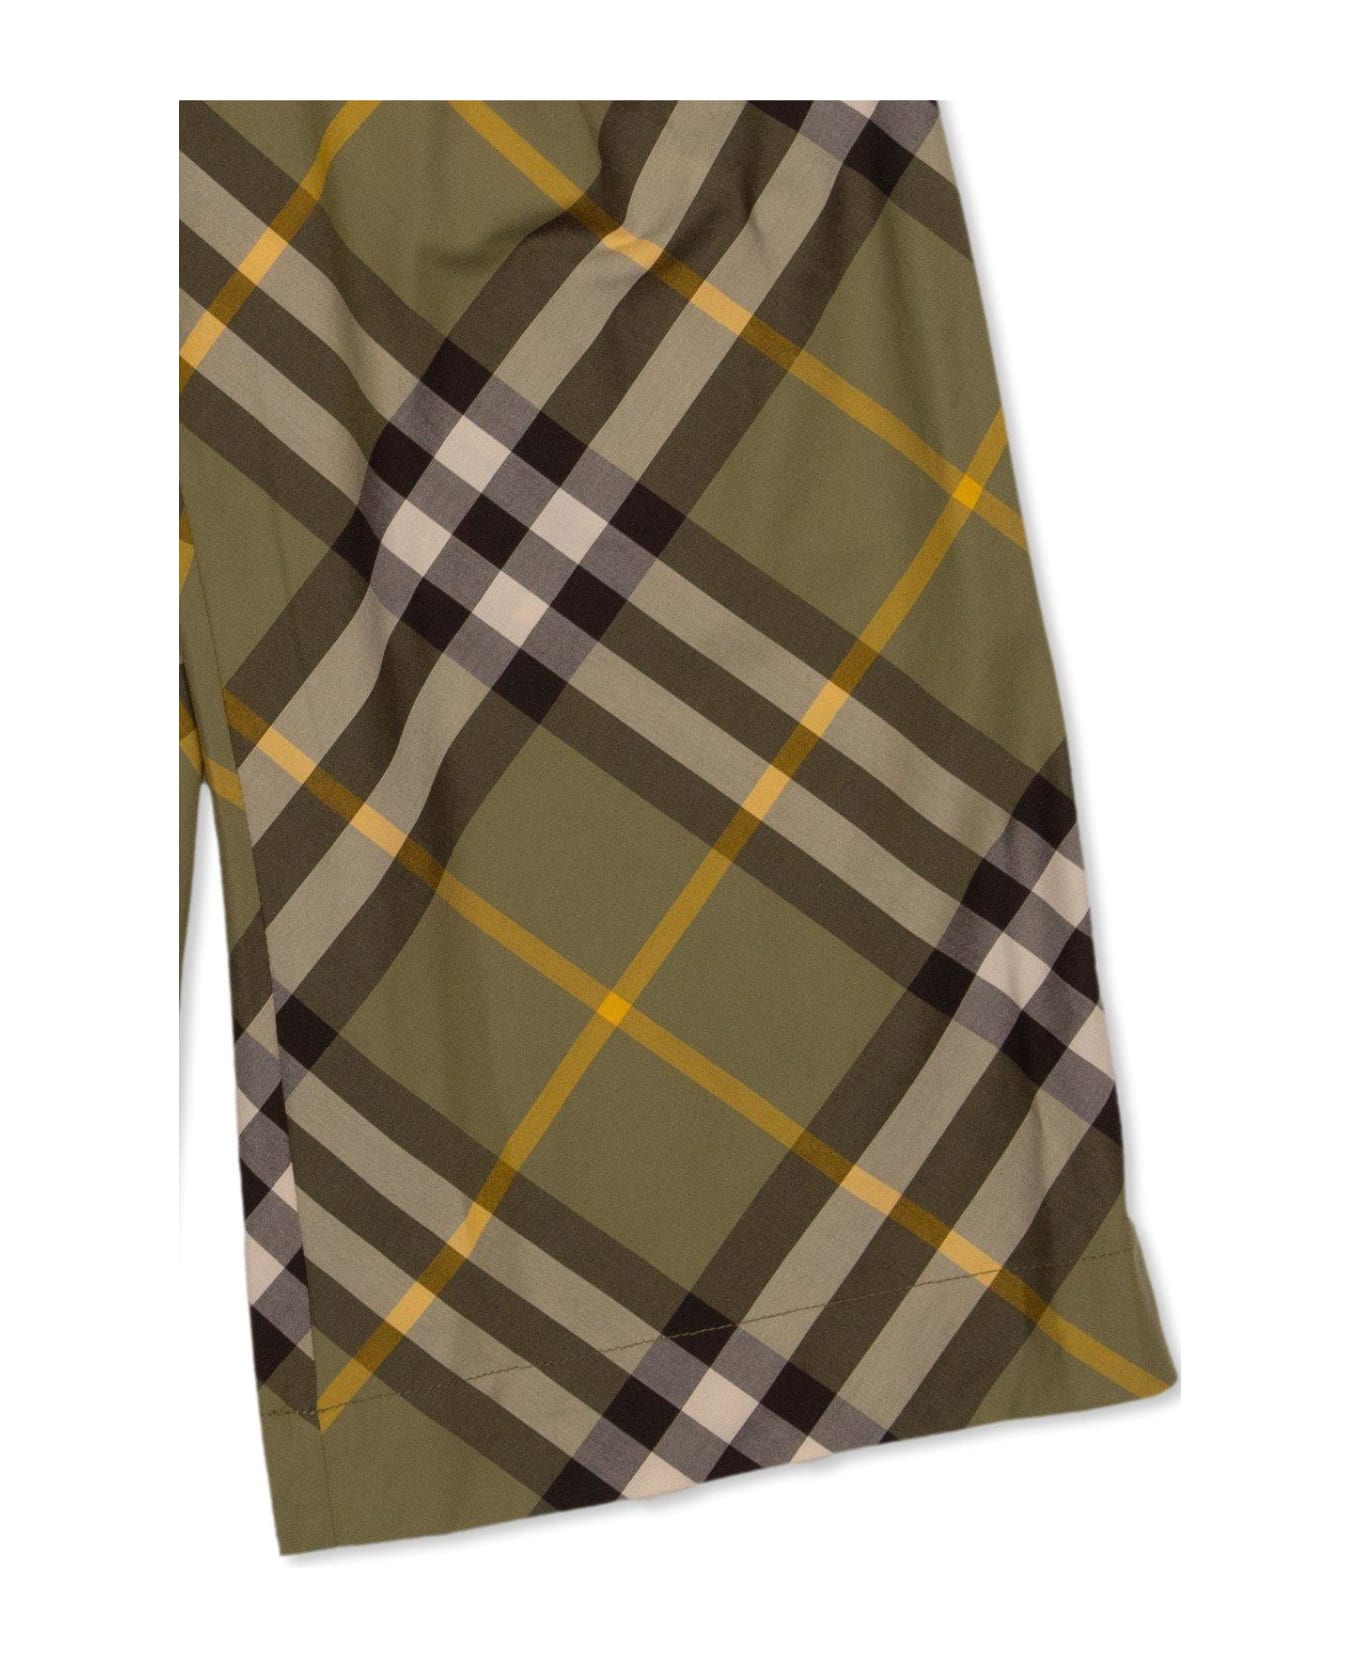 Burberry Checked Wide-leg Trousers - Check